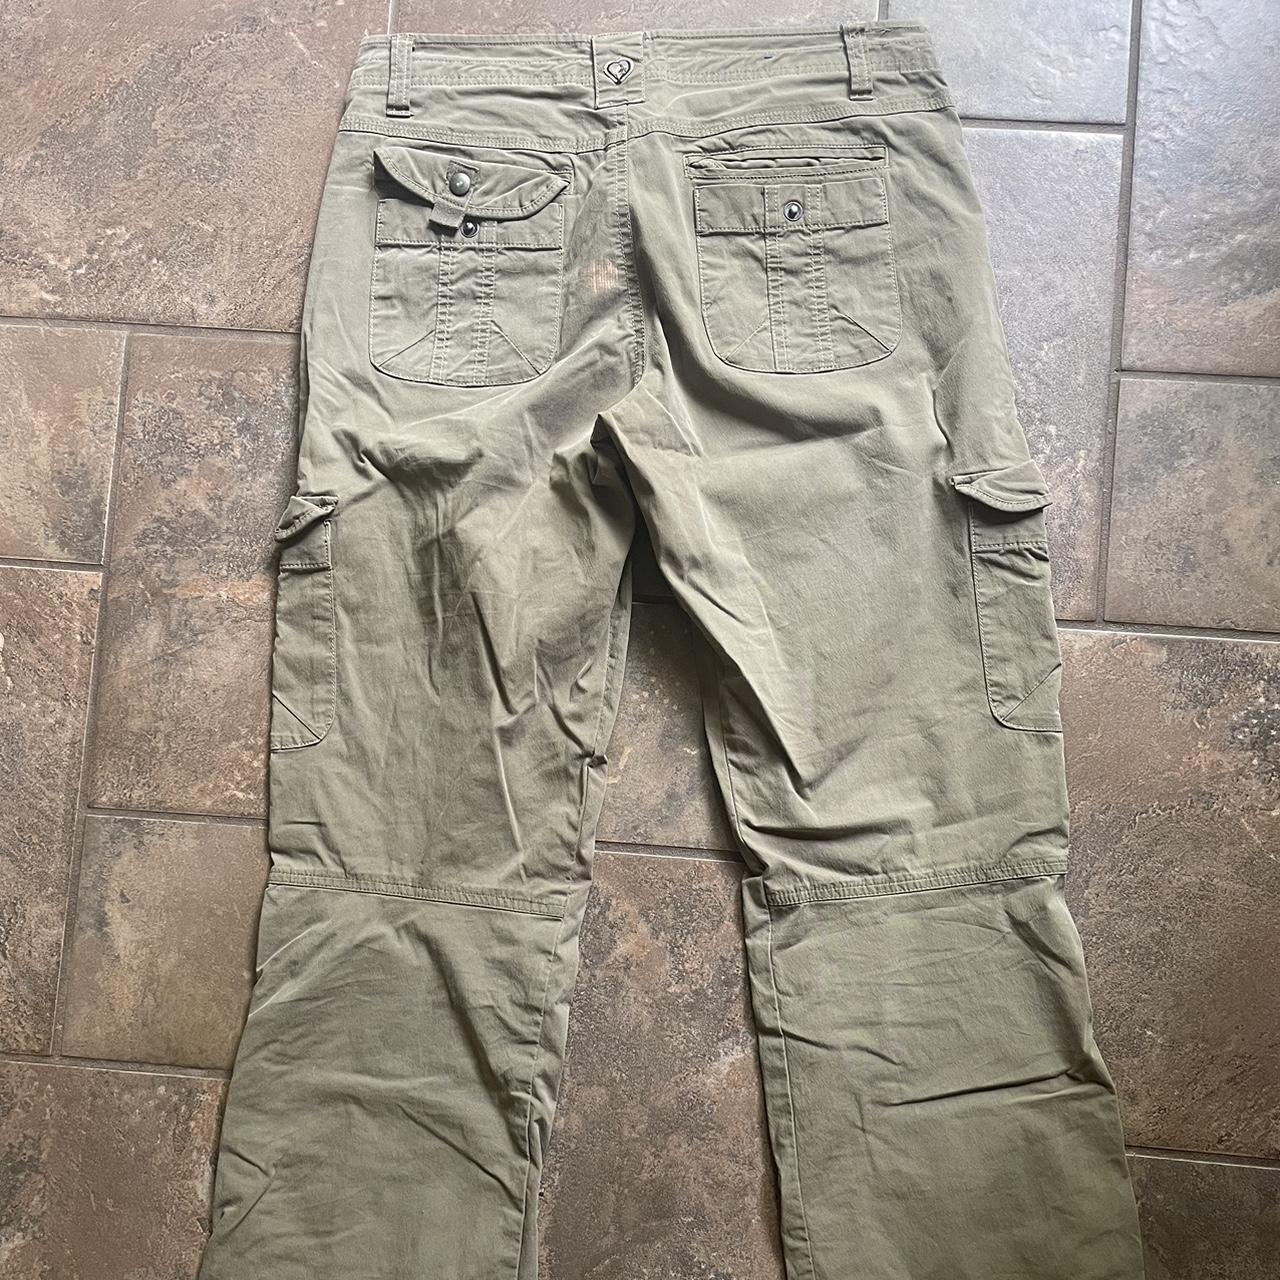 These Kühl cargo hiking pants are great for the - Depop